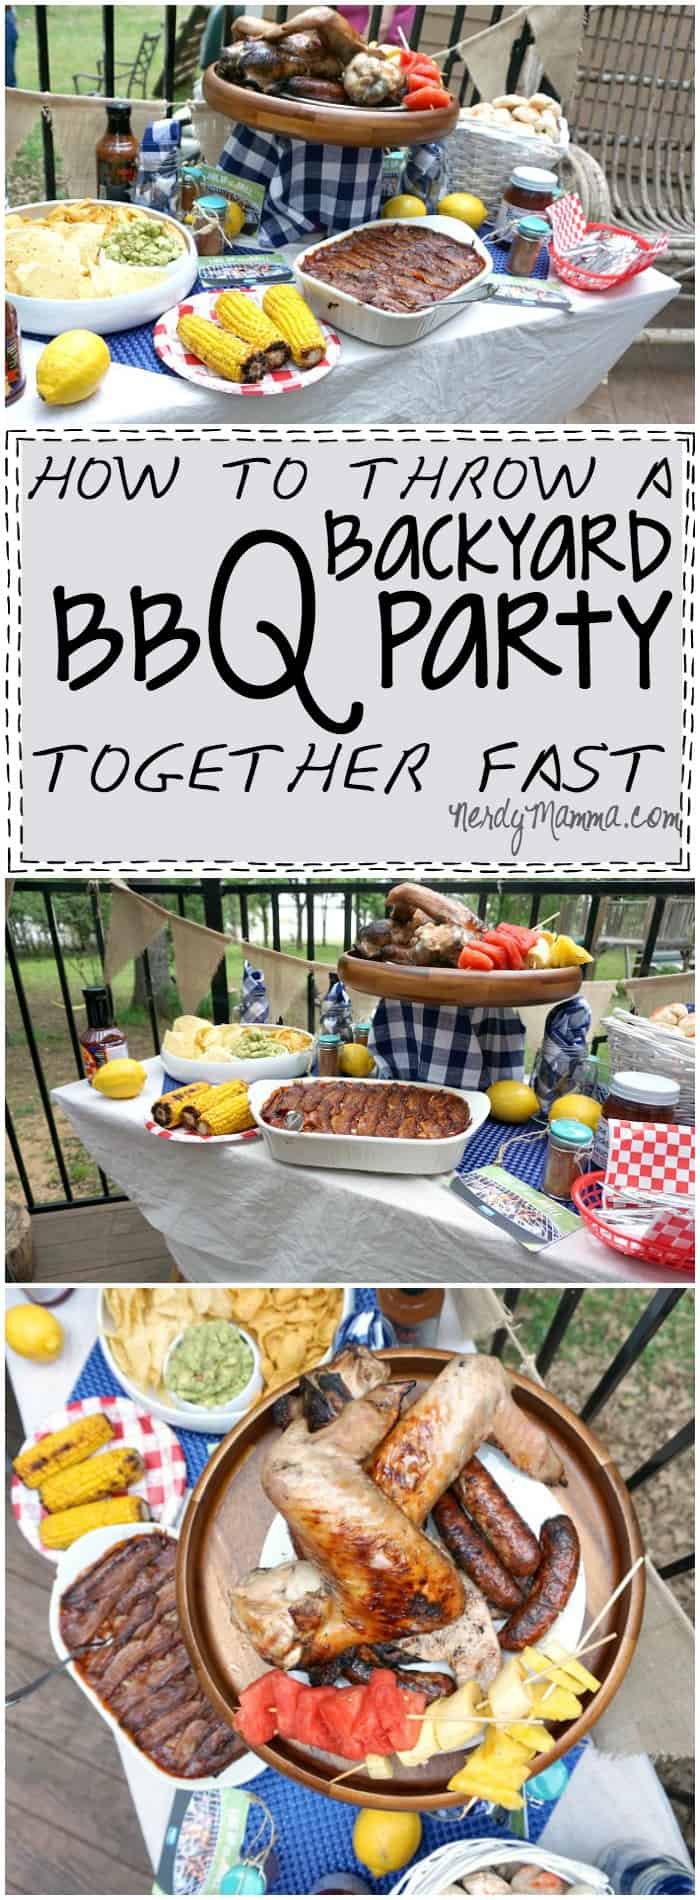 These tips for a Backyard BBQ Party--genius! I mean, I didn't realize it was so easy. I might just have to do this the next time I'm in need of a cookout!